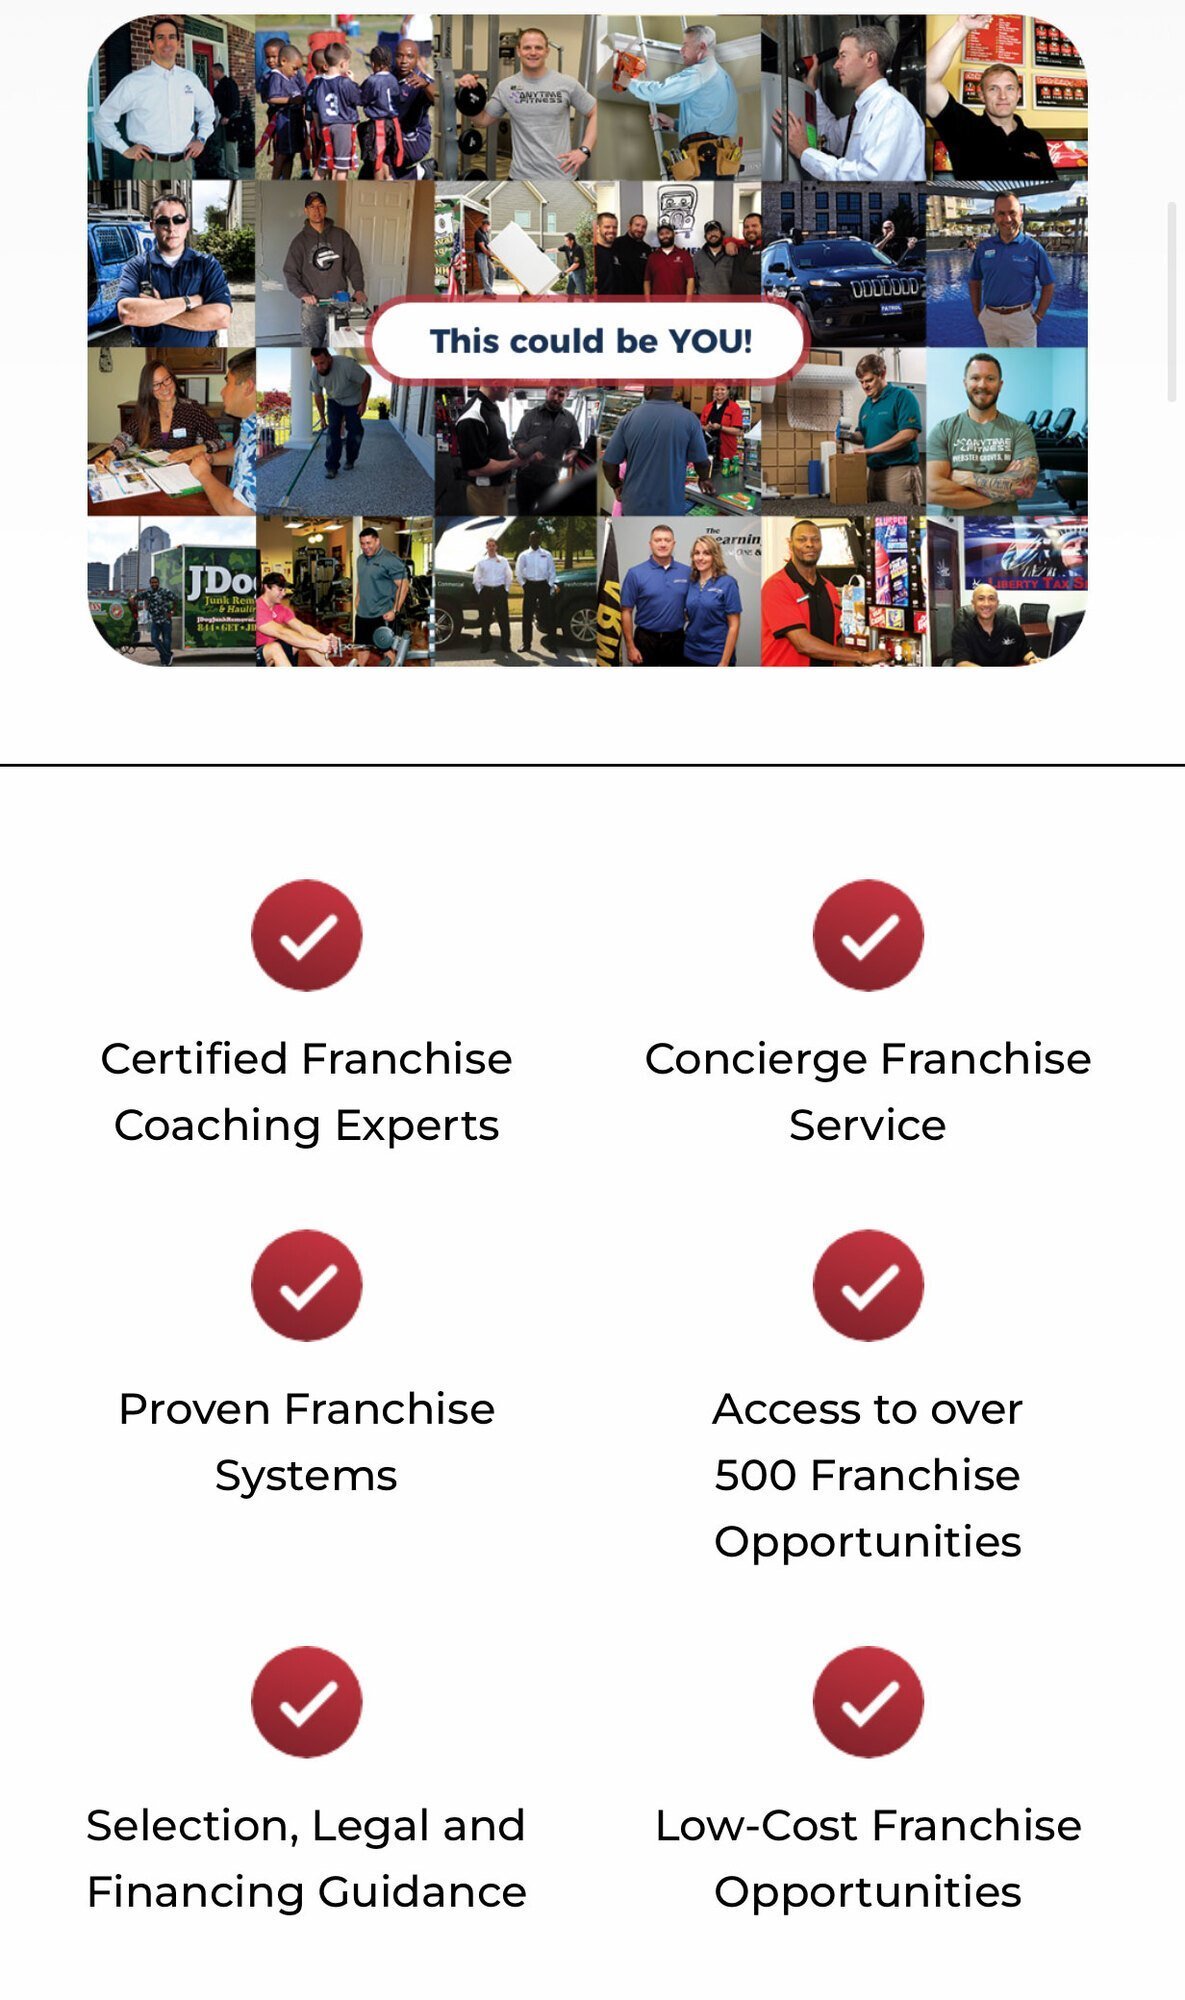 Proven Franchise Systems